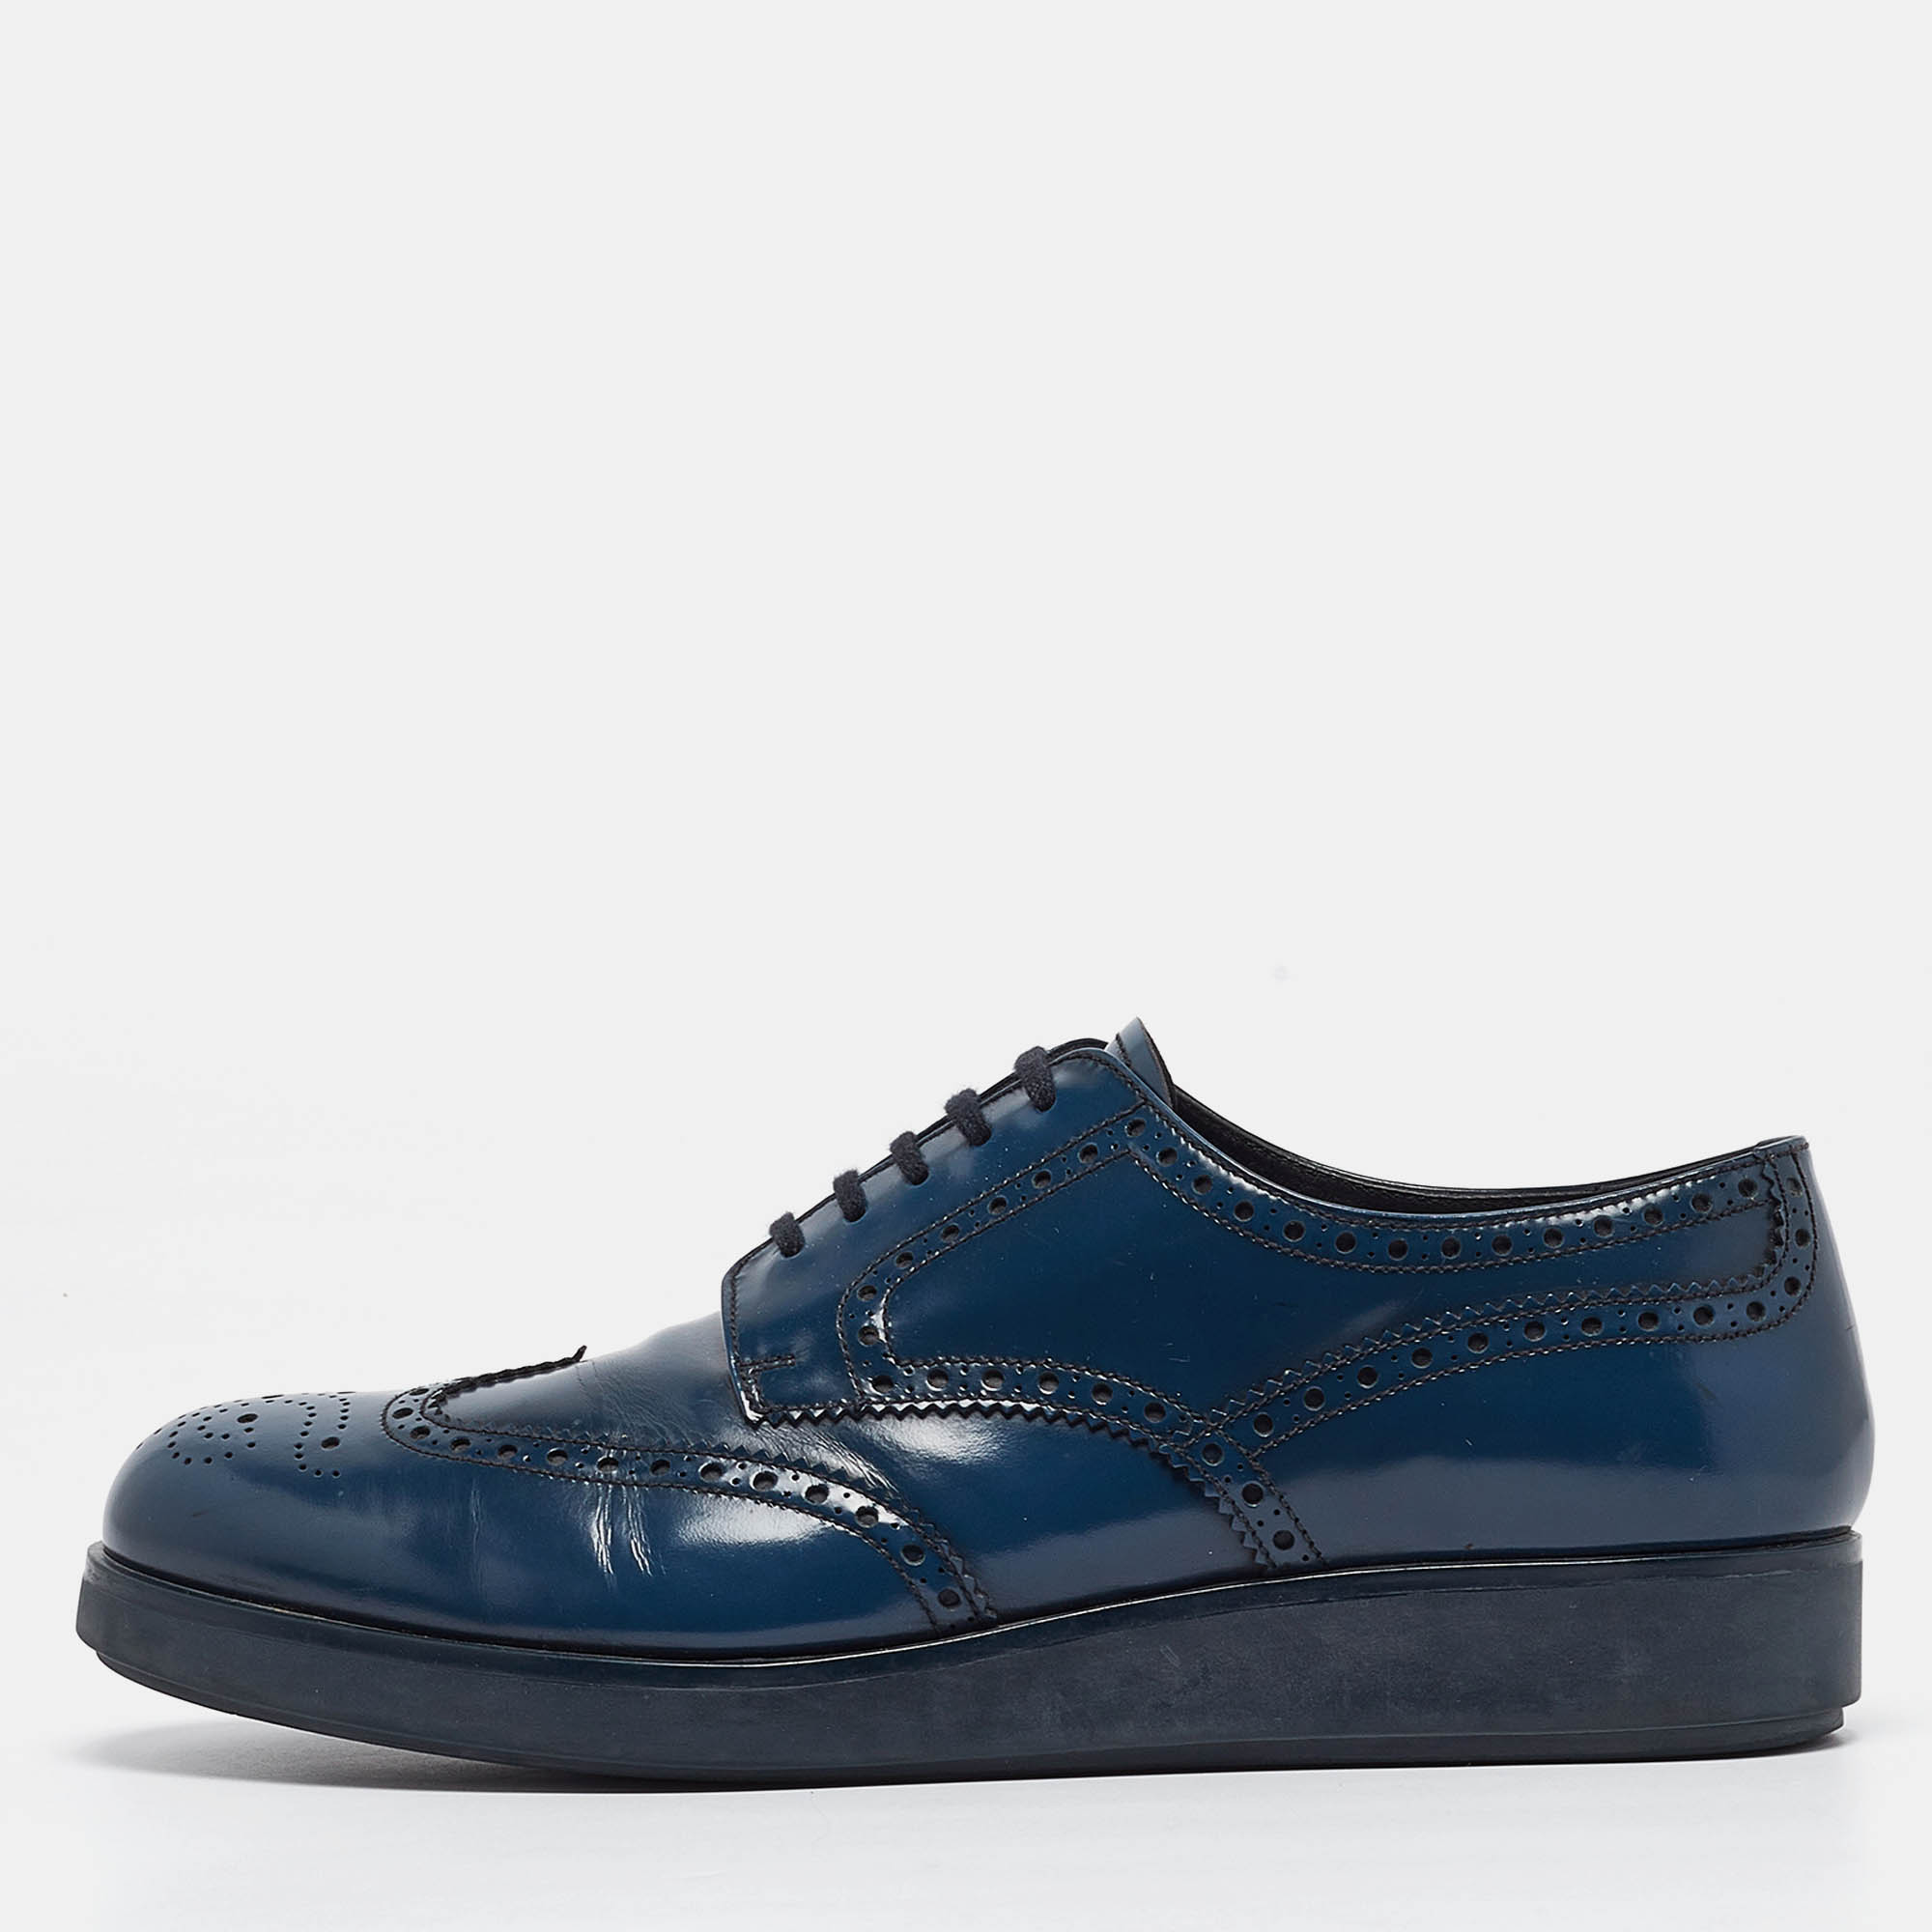 Prada blue leather oxford sneakers size 43.5